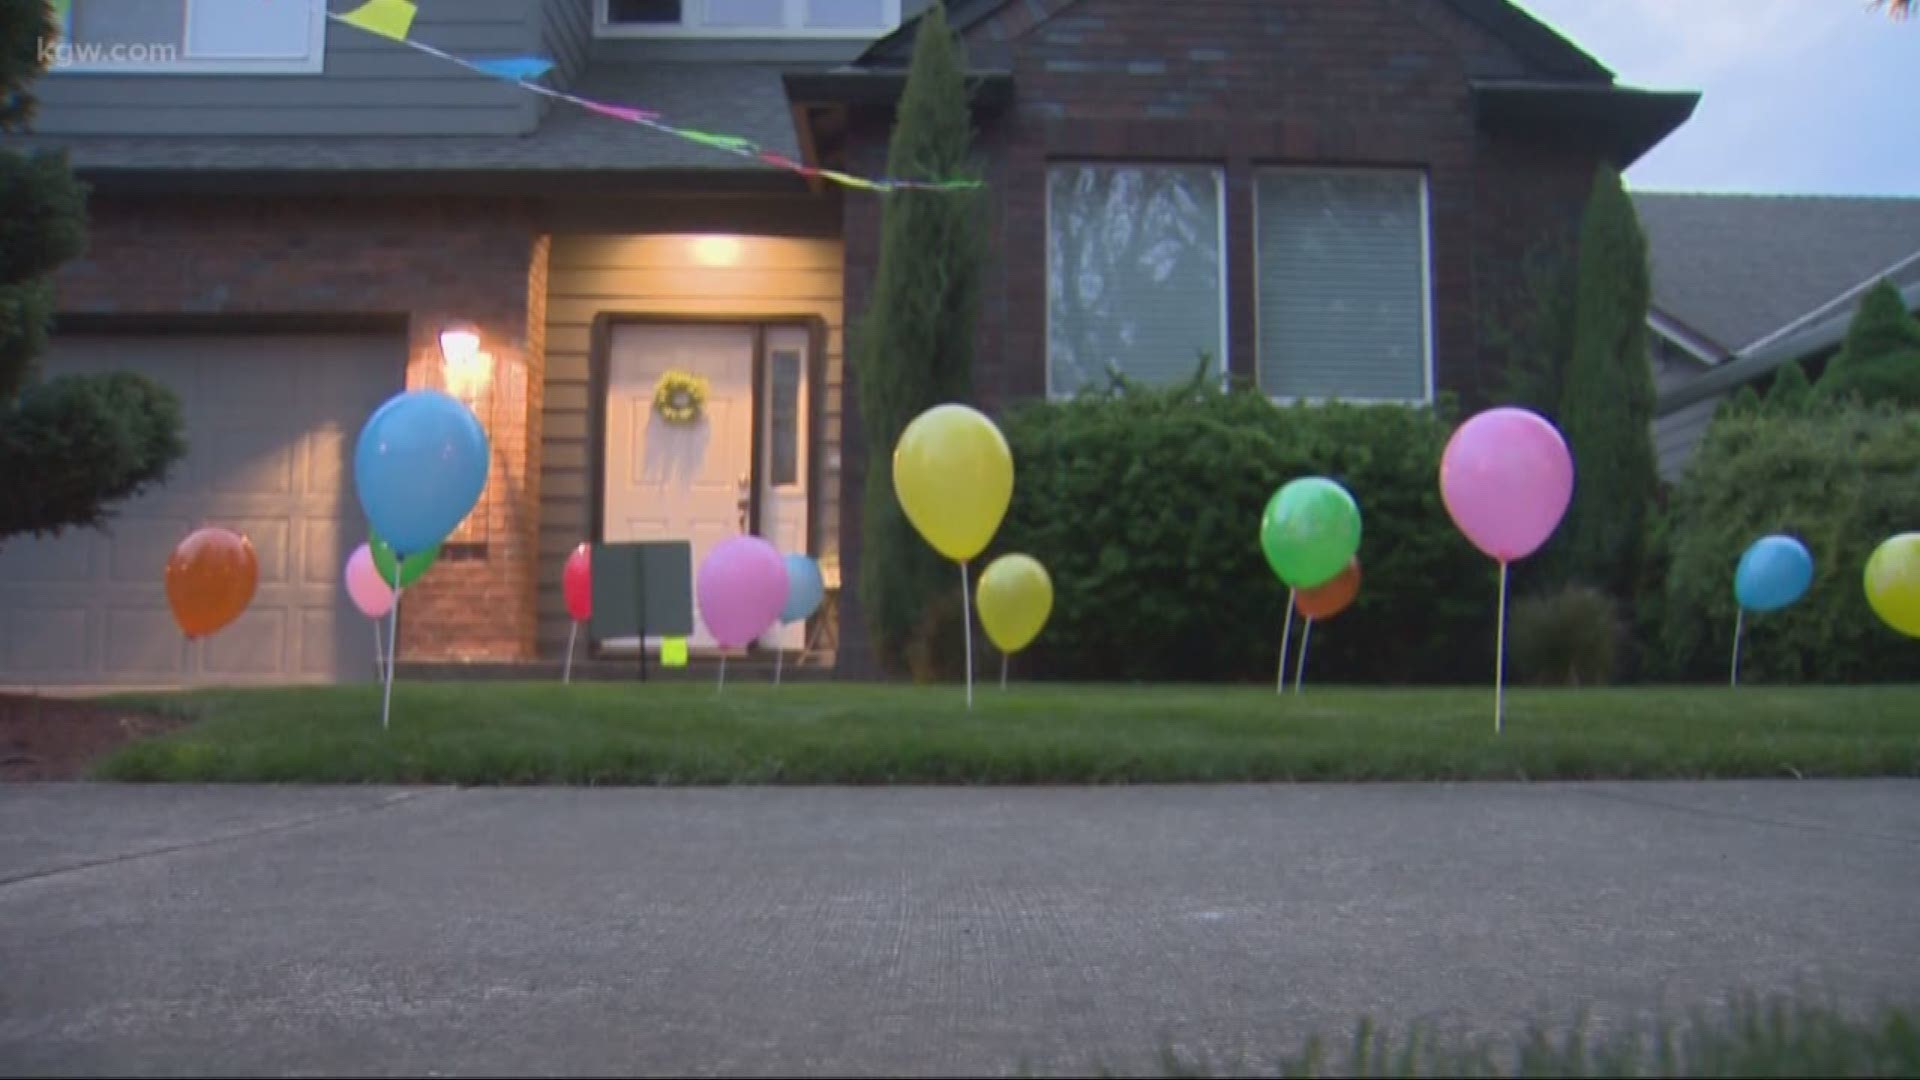 It started with an idea for his nephew now you may see more and more of these special birthday surprises-- popping up at homes around Portland area!